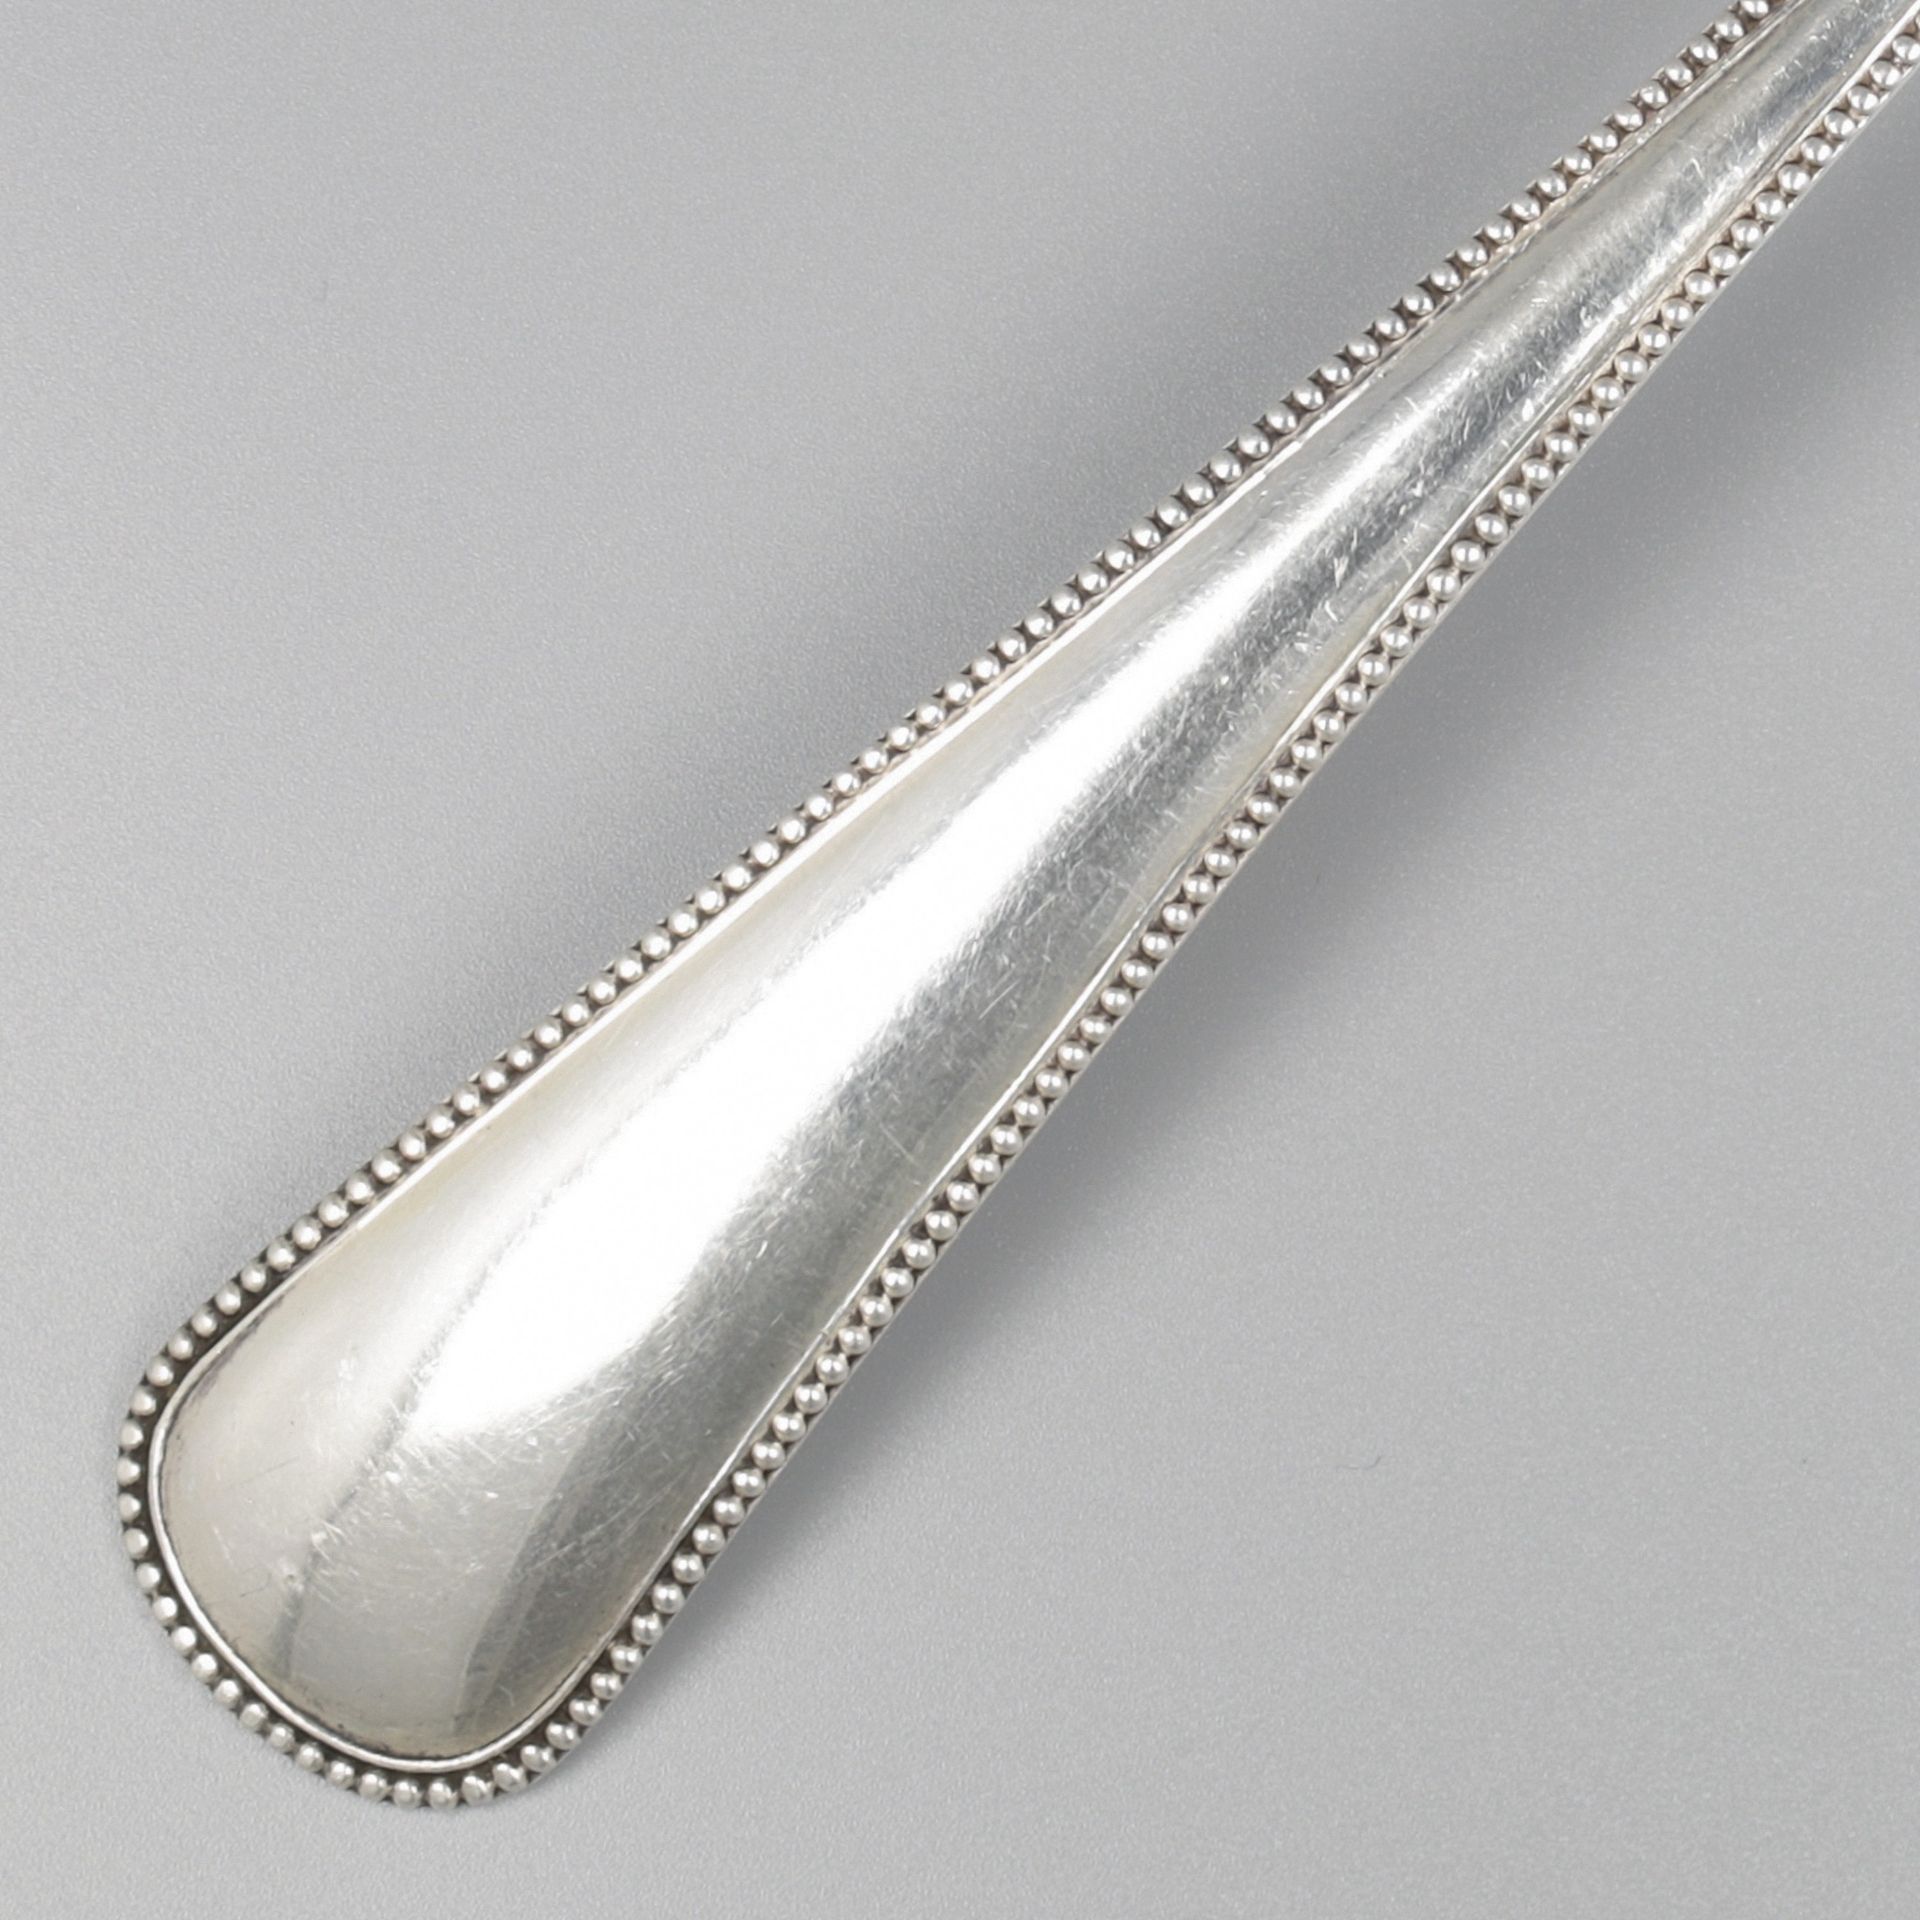 No reserve - Vegetable serving spoon silver. - Image 3 of 5